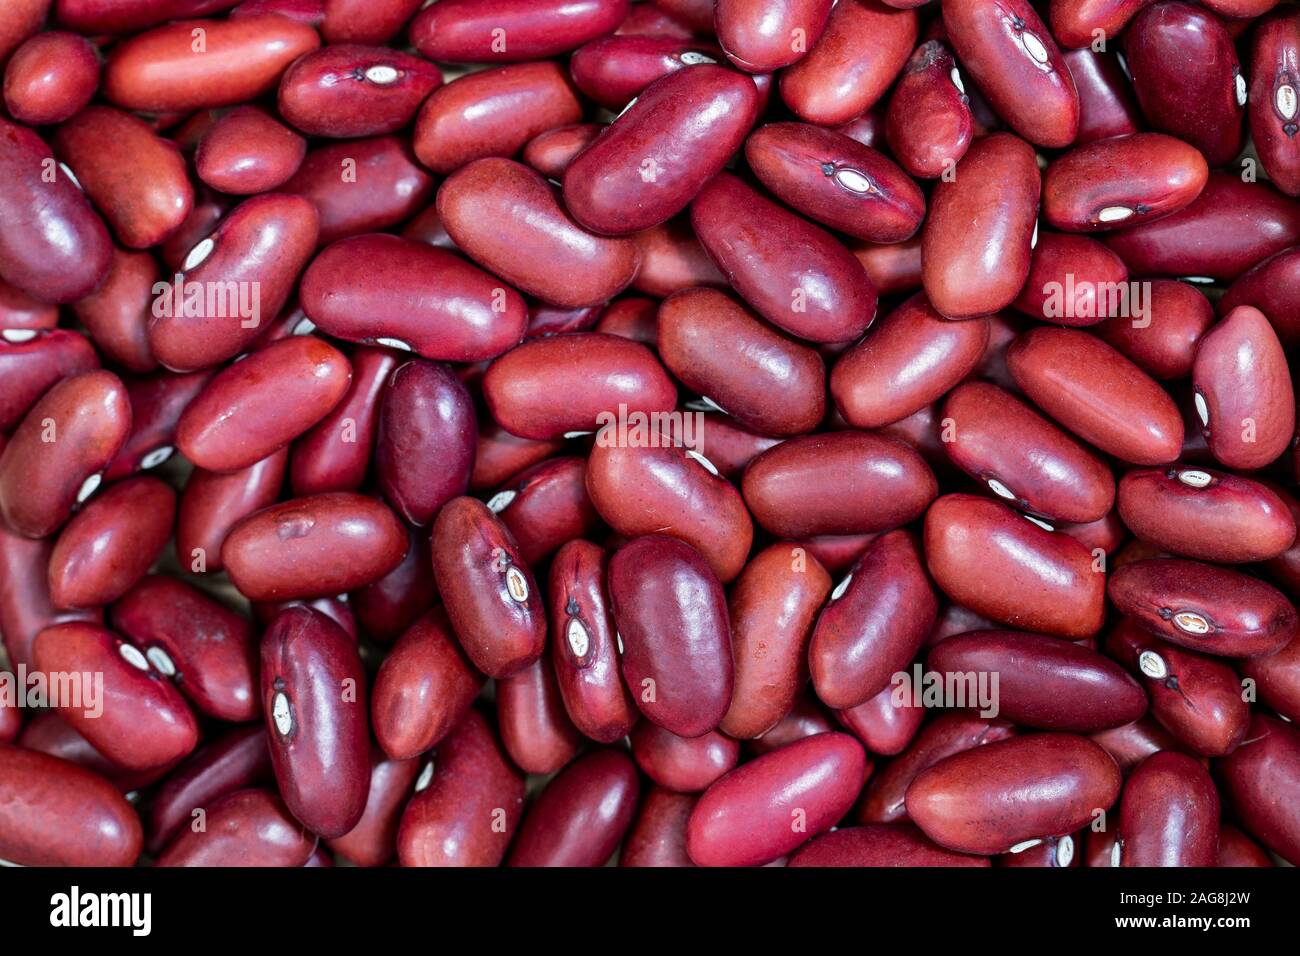 Red bean close-up. Spain Stock Photo